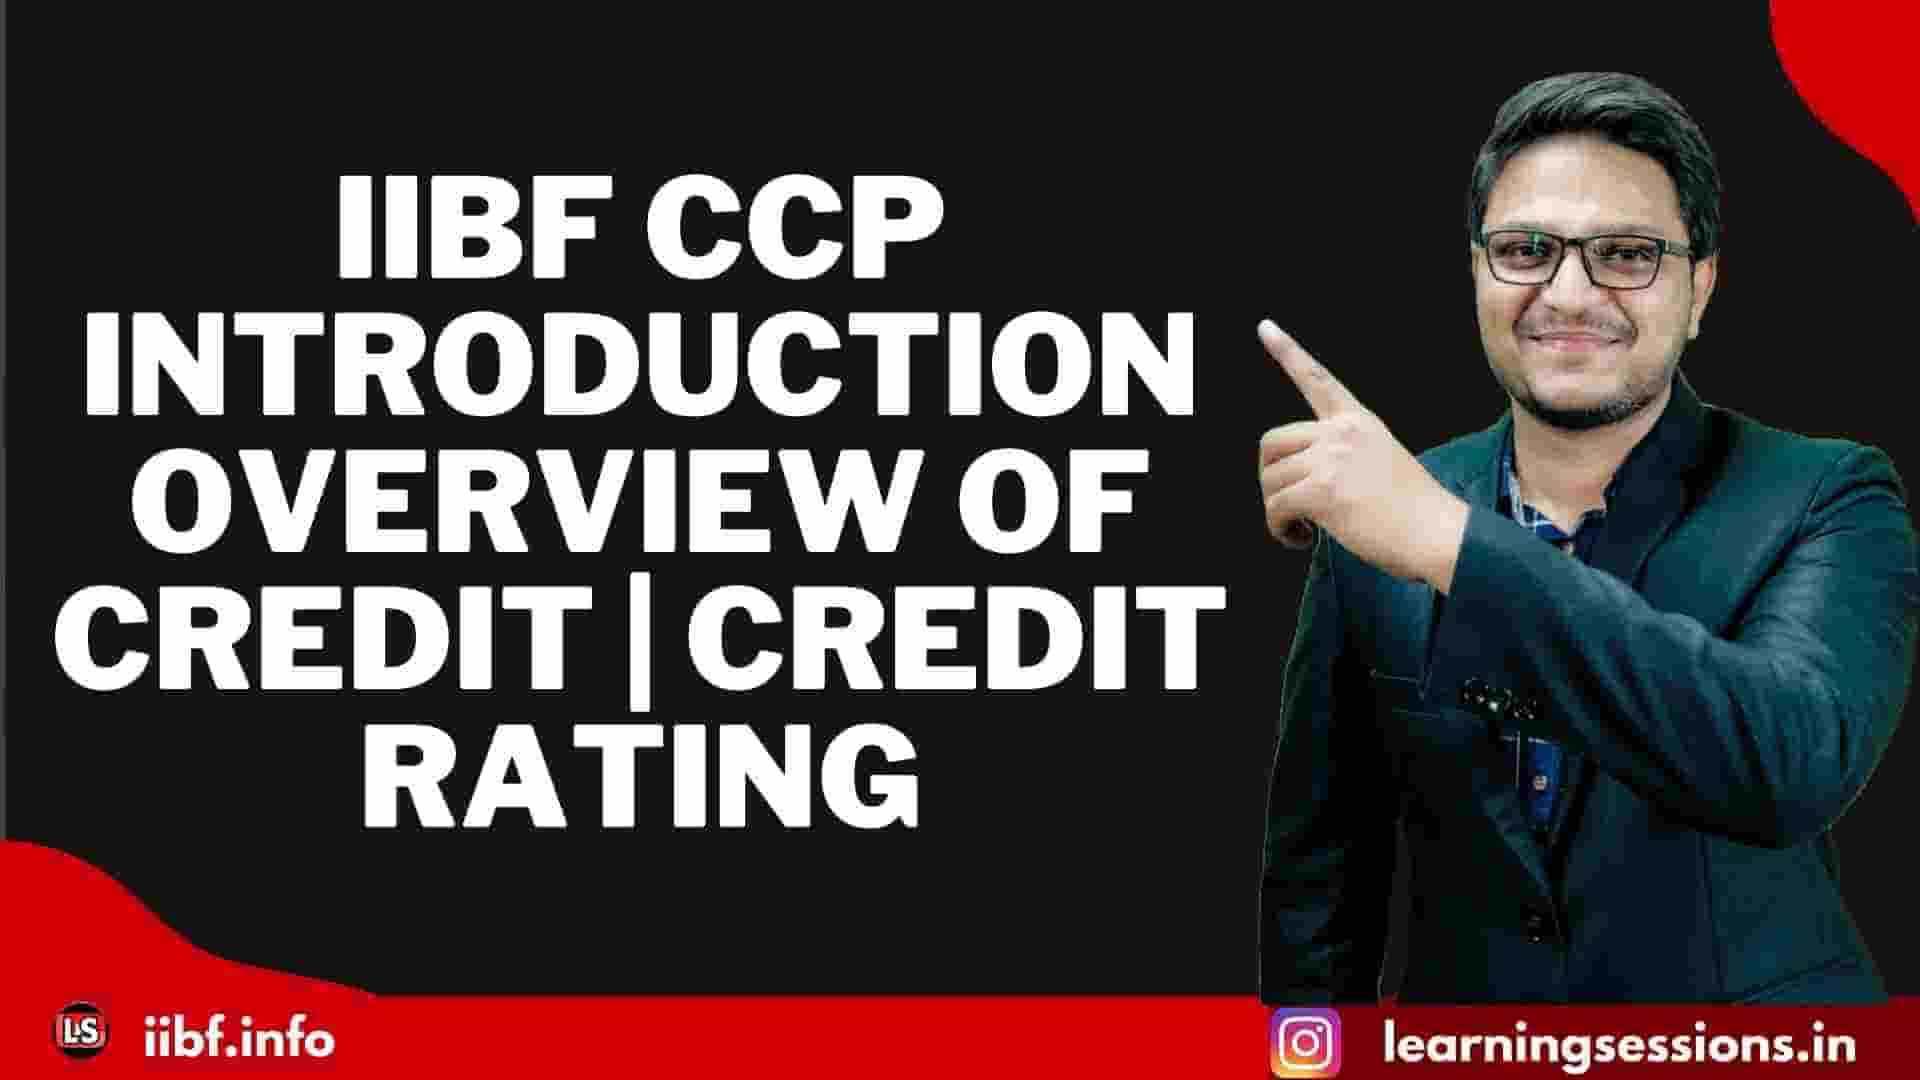 IIBF CCP | INTRODUCTION & OVERVIEW OF CREDIT |CREDIT RATING